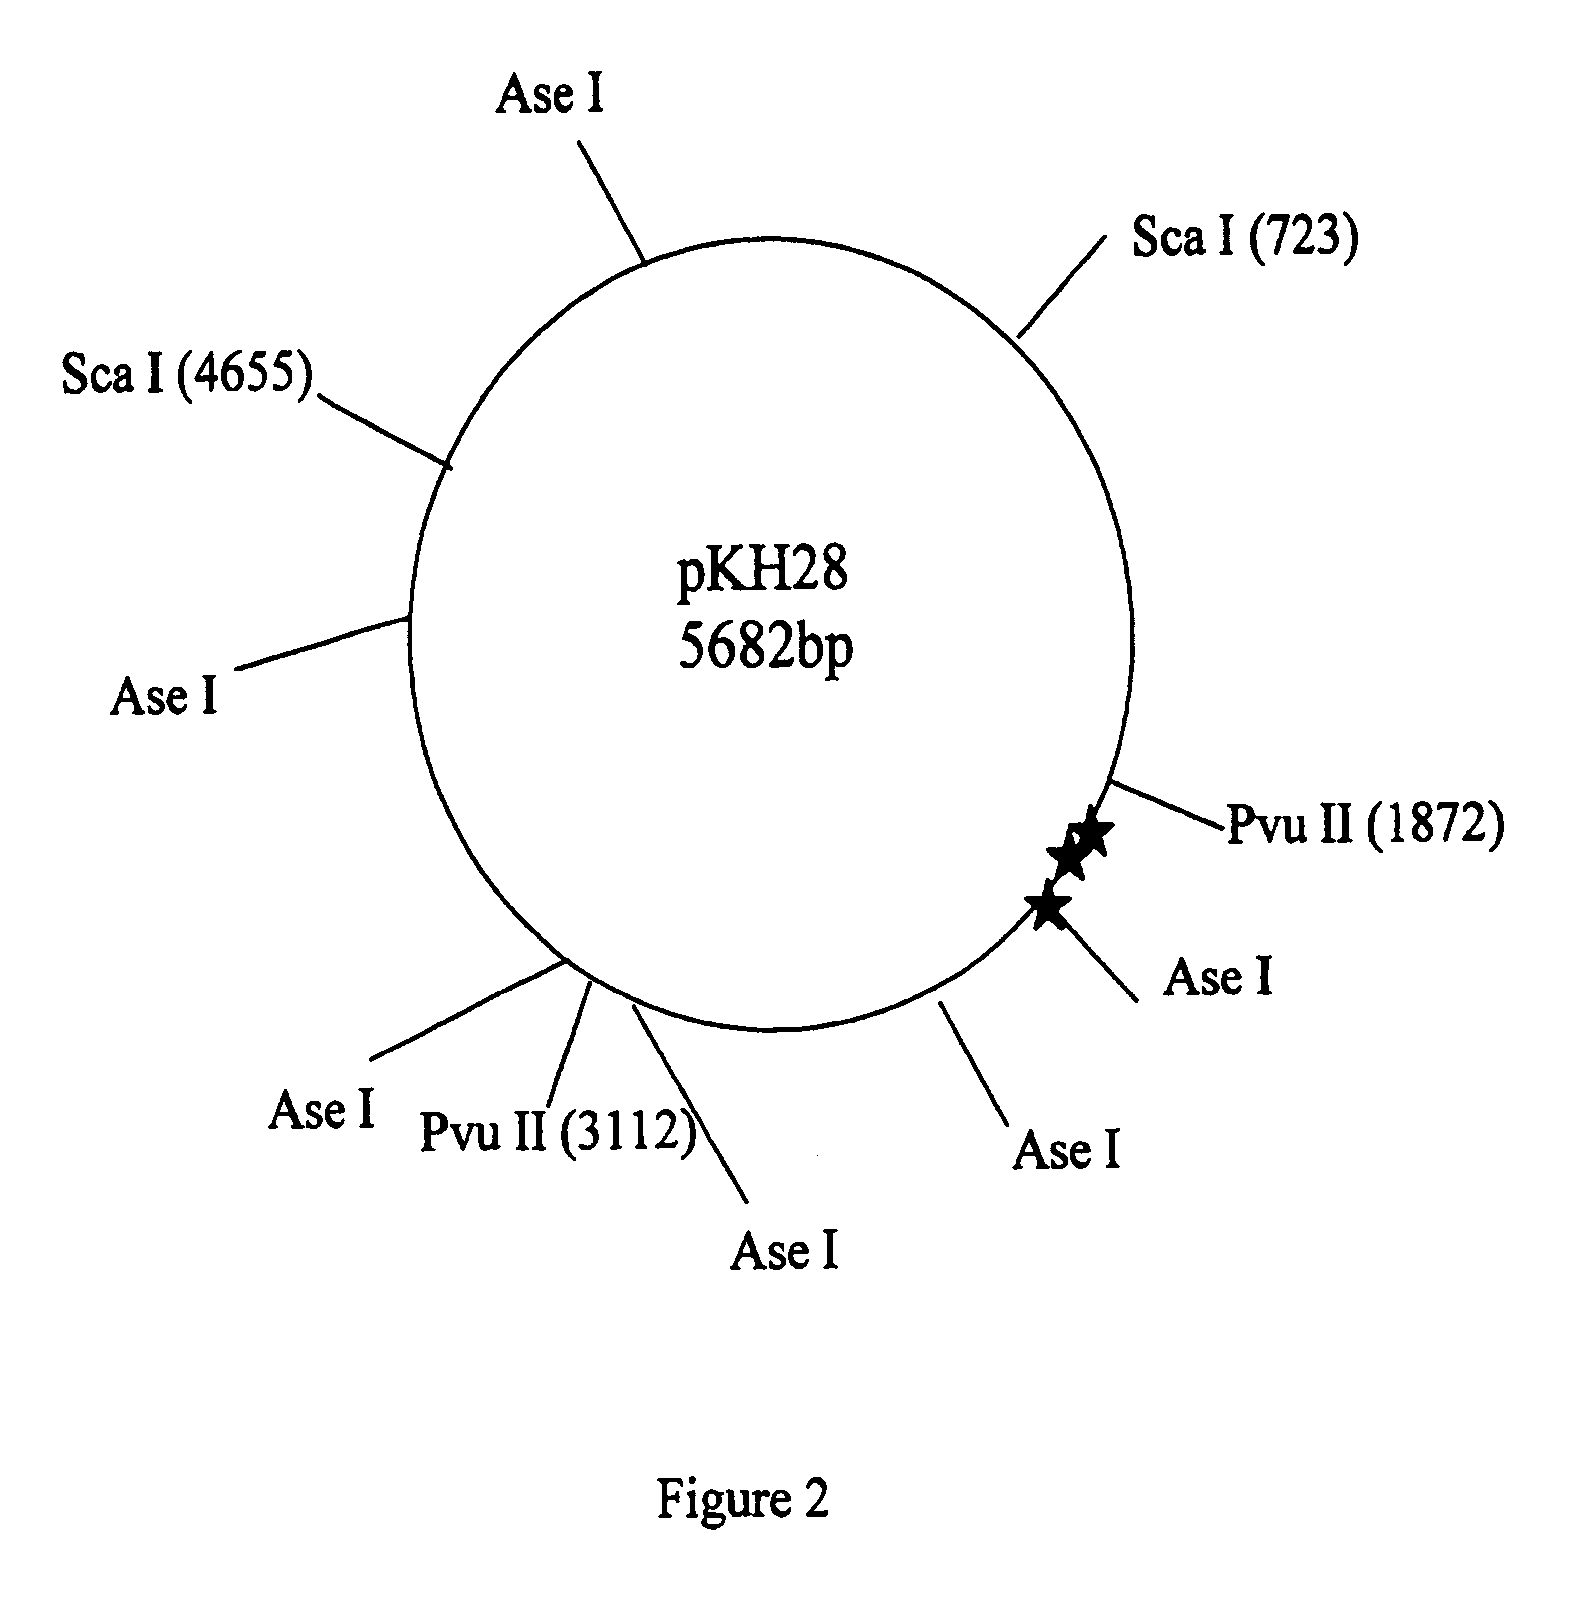 Methods for detecting and localizing DNA mutations by microarray